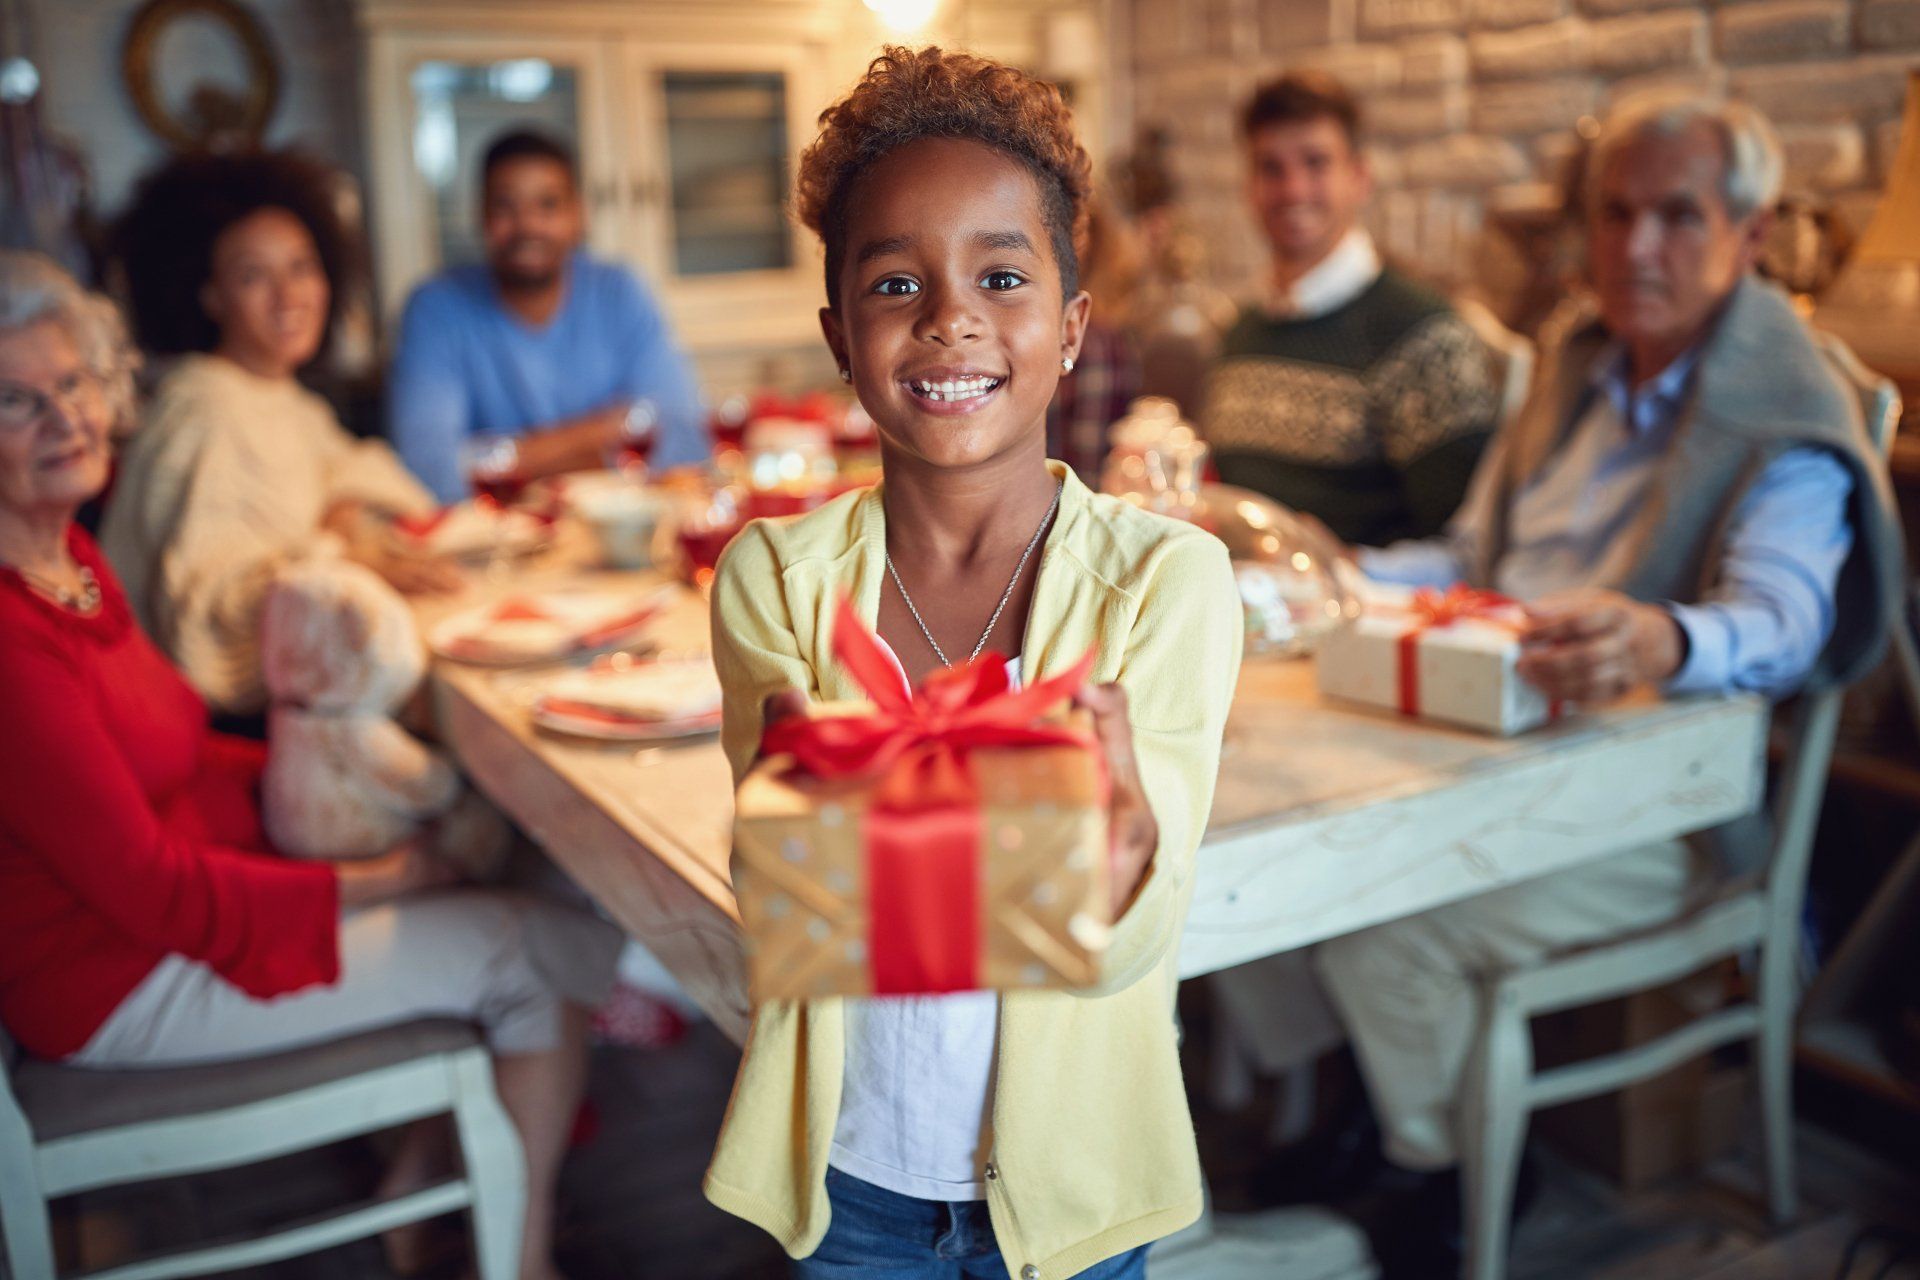 little girl holding wrapped gift and smiling while family looks on in background